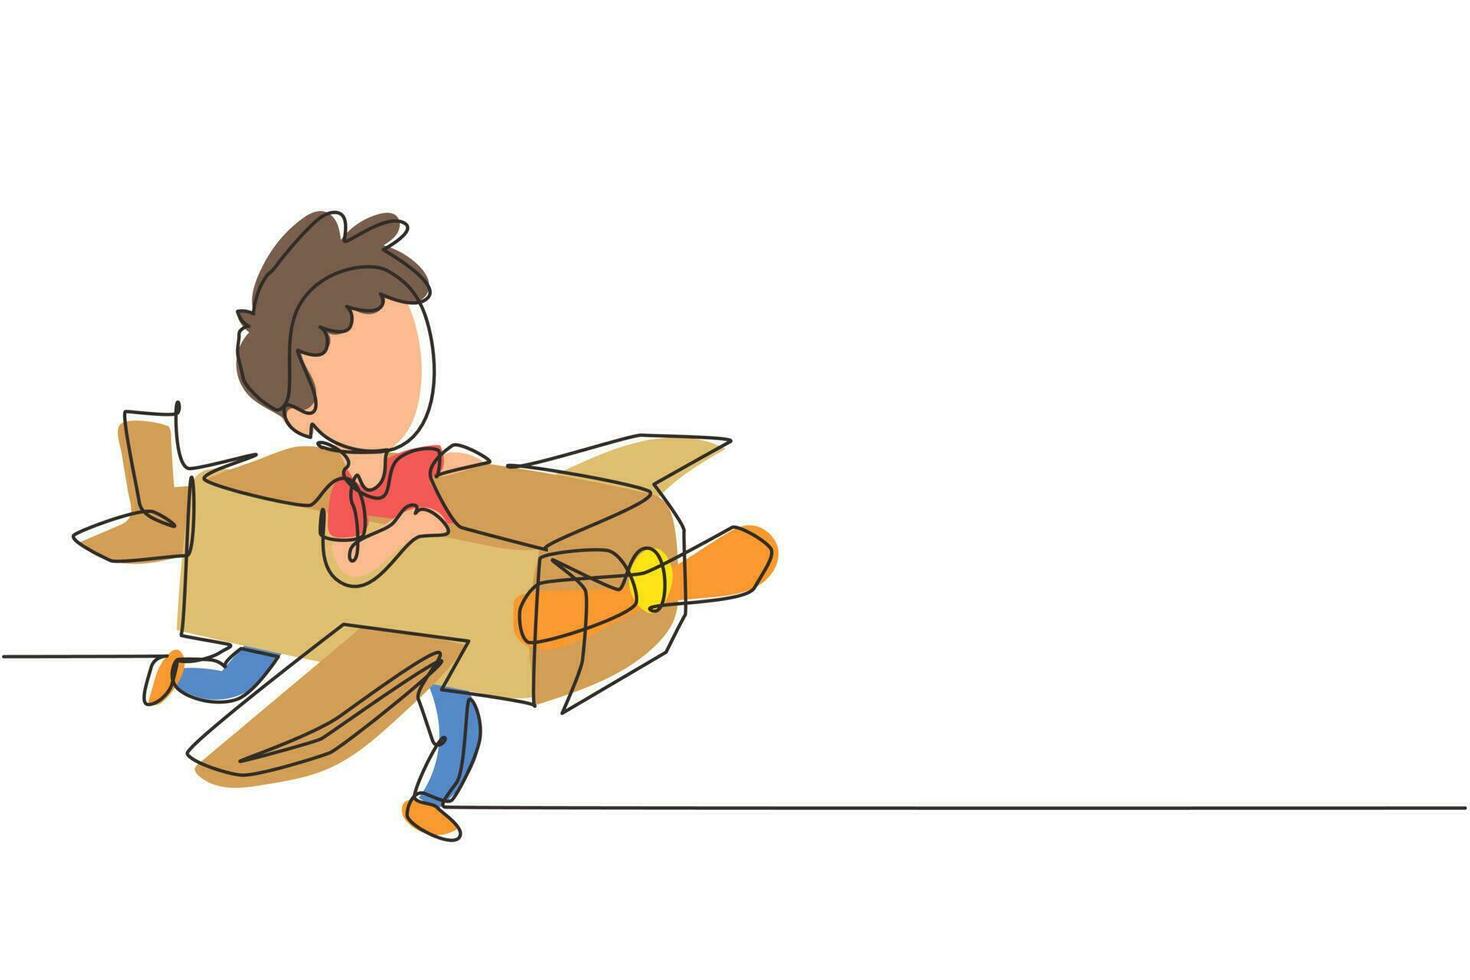 Single one line drawing creative boy playing as pilot with cardboard airplane. Happy kids riding cardboard handmade airplane. Plane game. Modern continuous line draw design graphic vector illustration